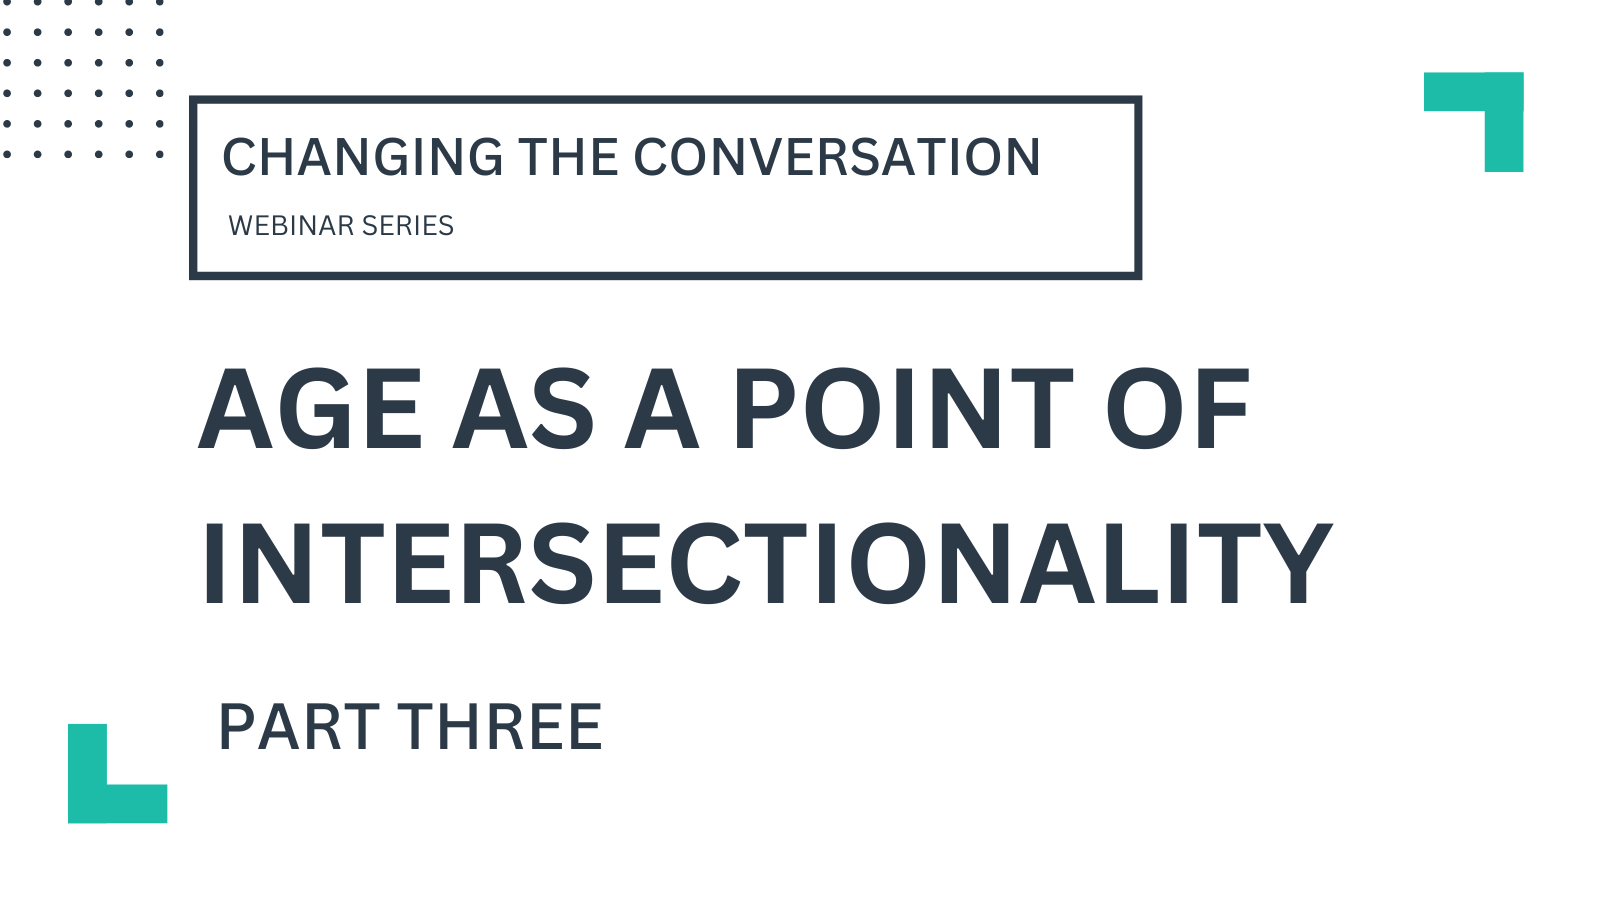 Changing the Conversation Topic: Age as a Point of Intersectionality